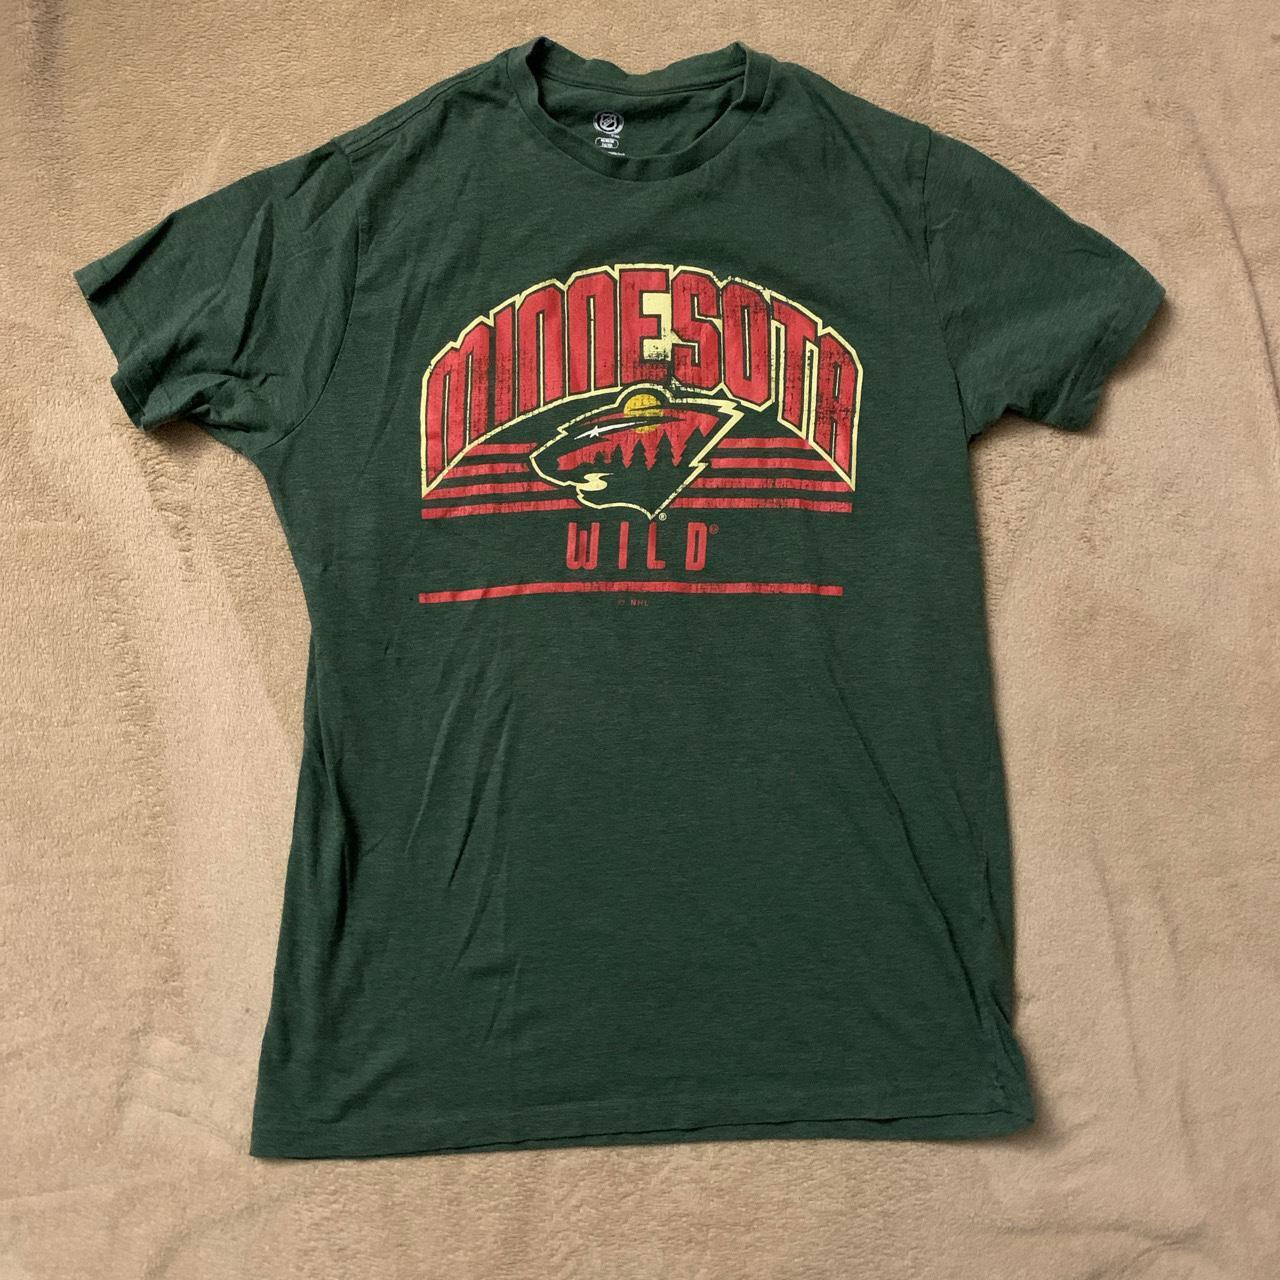 Minnesota Wild T-Shirt in good condition with no... - Depop